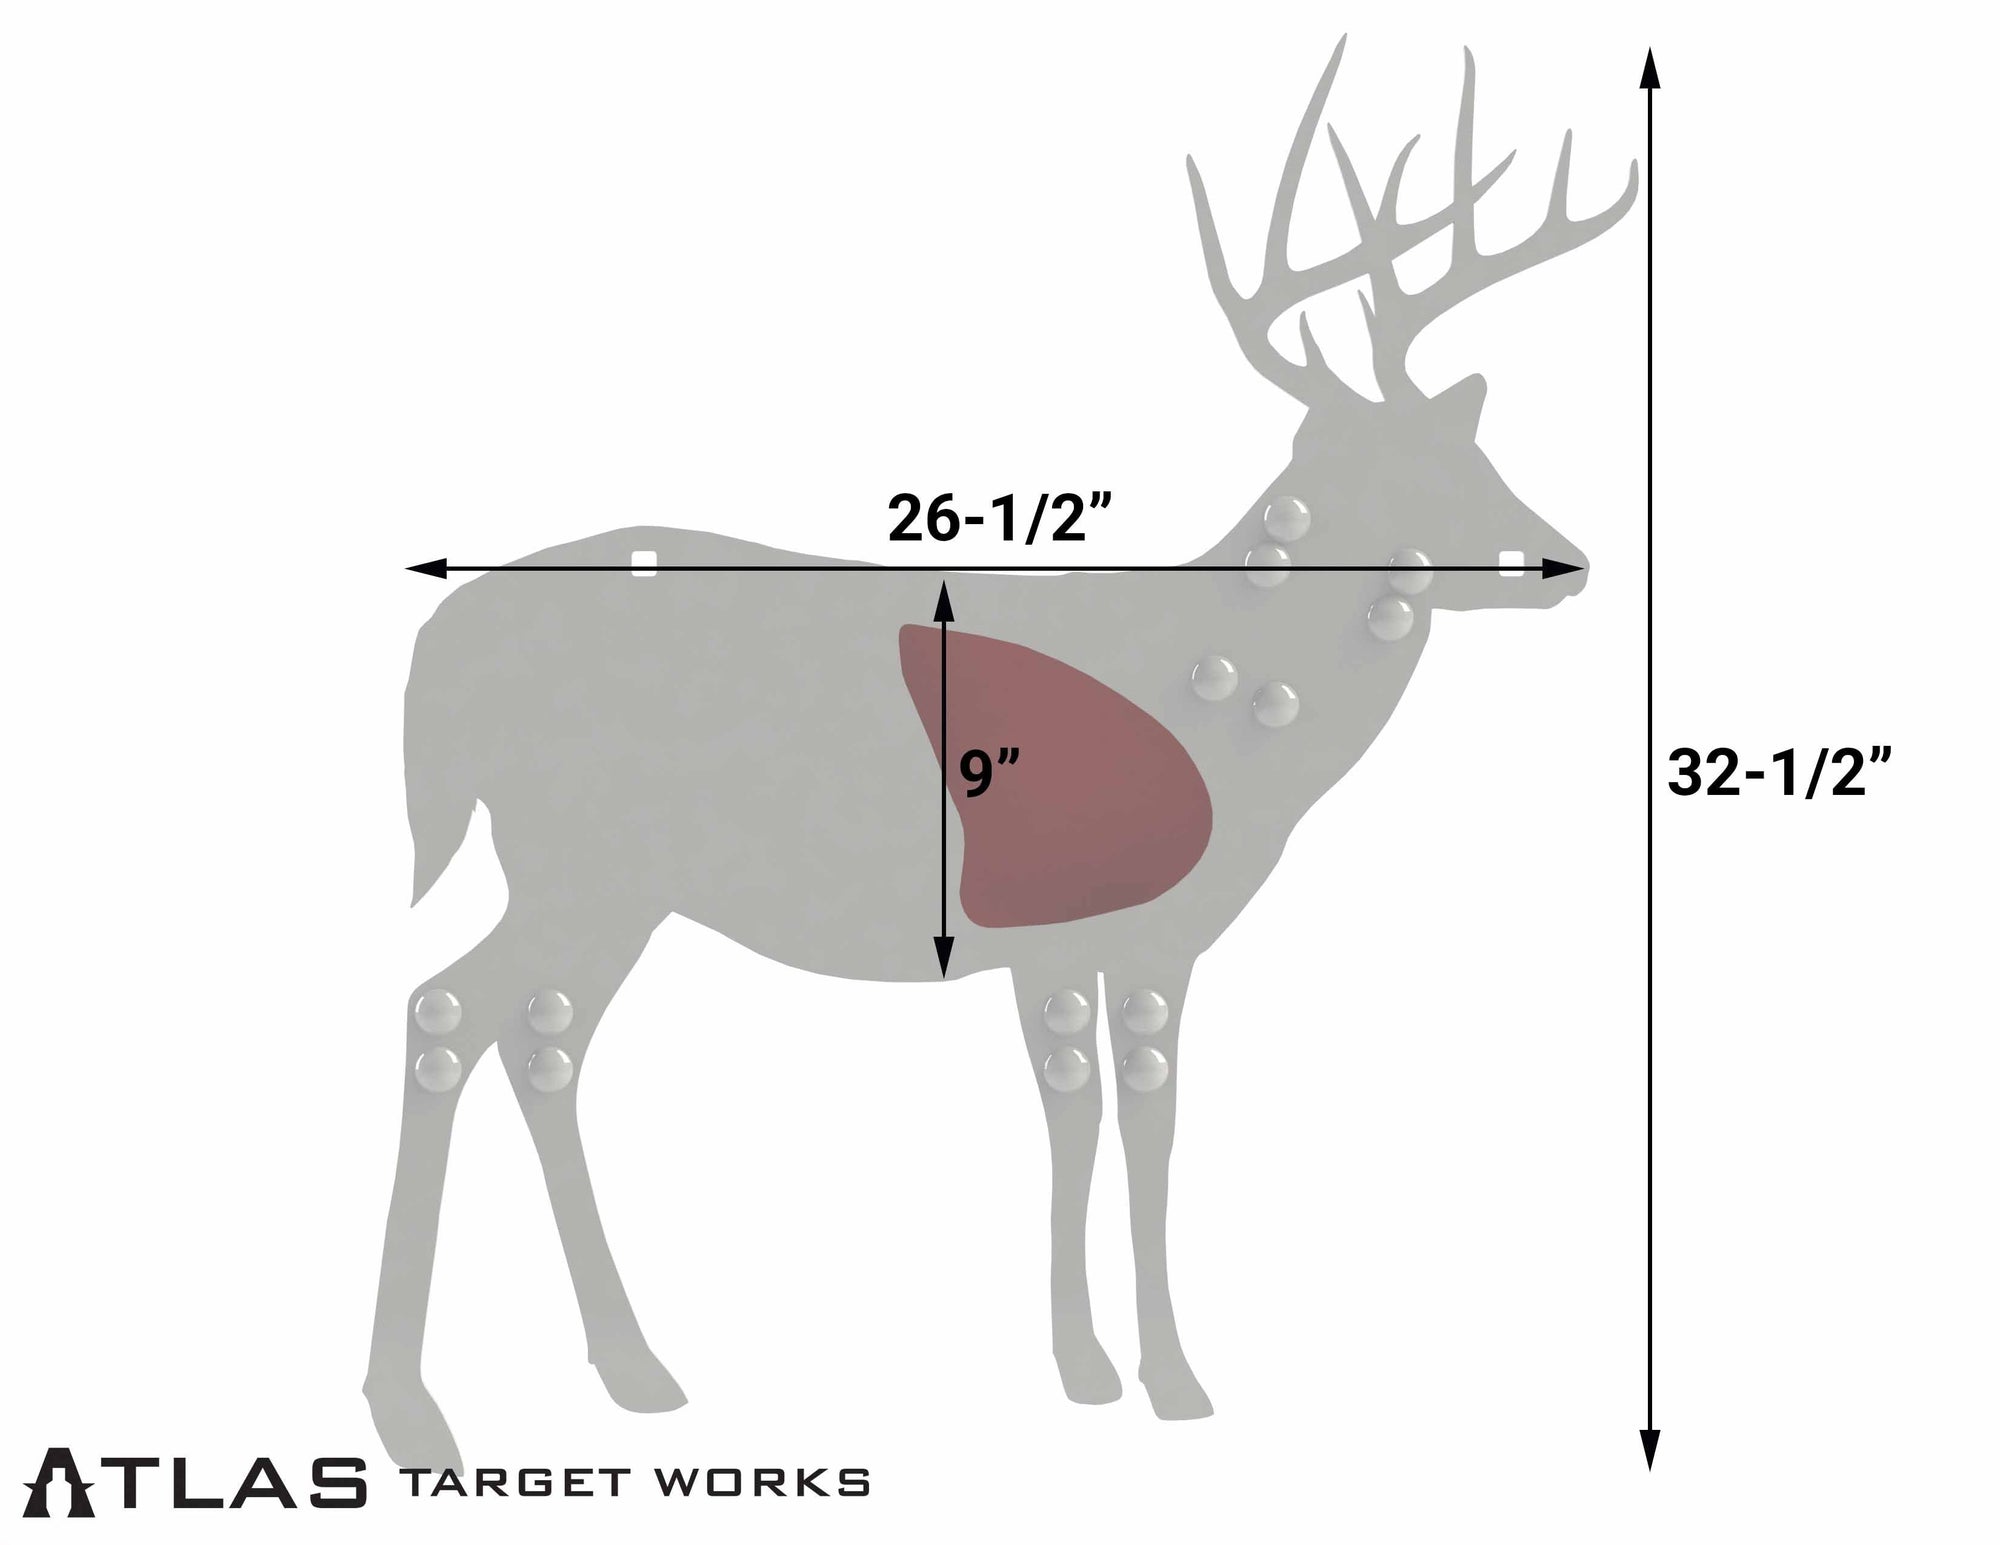 Half Scale AR500 Whitetail Buck Target with dimensions. 32 1/2" Tall and 26 1/2" Long 